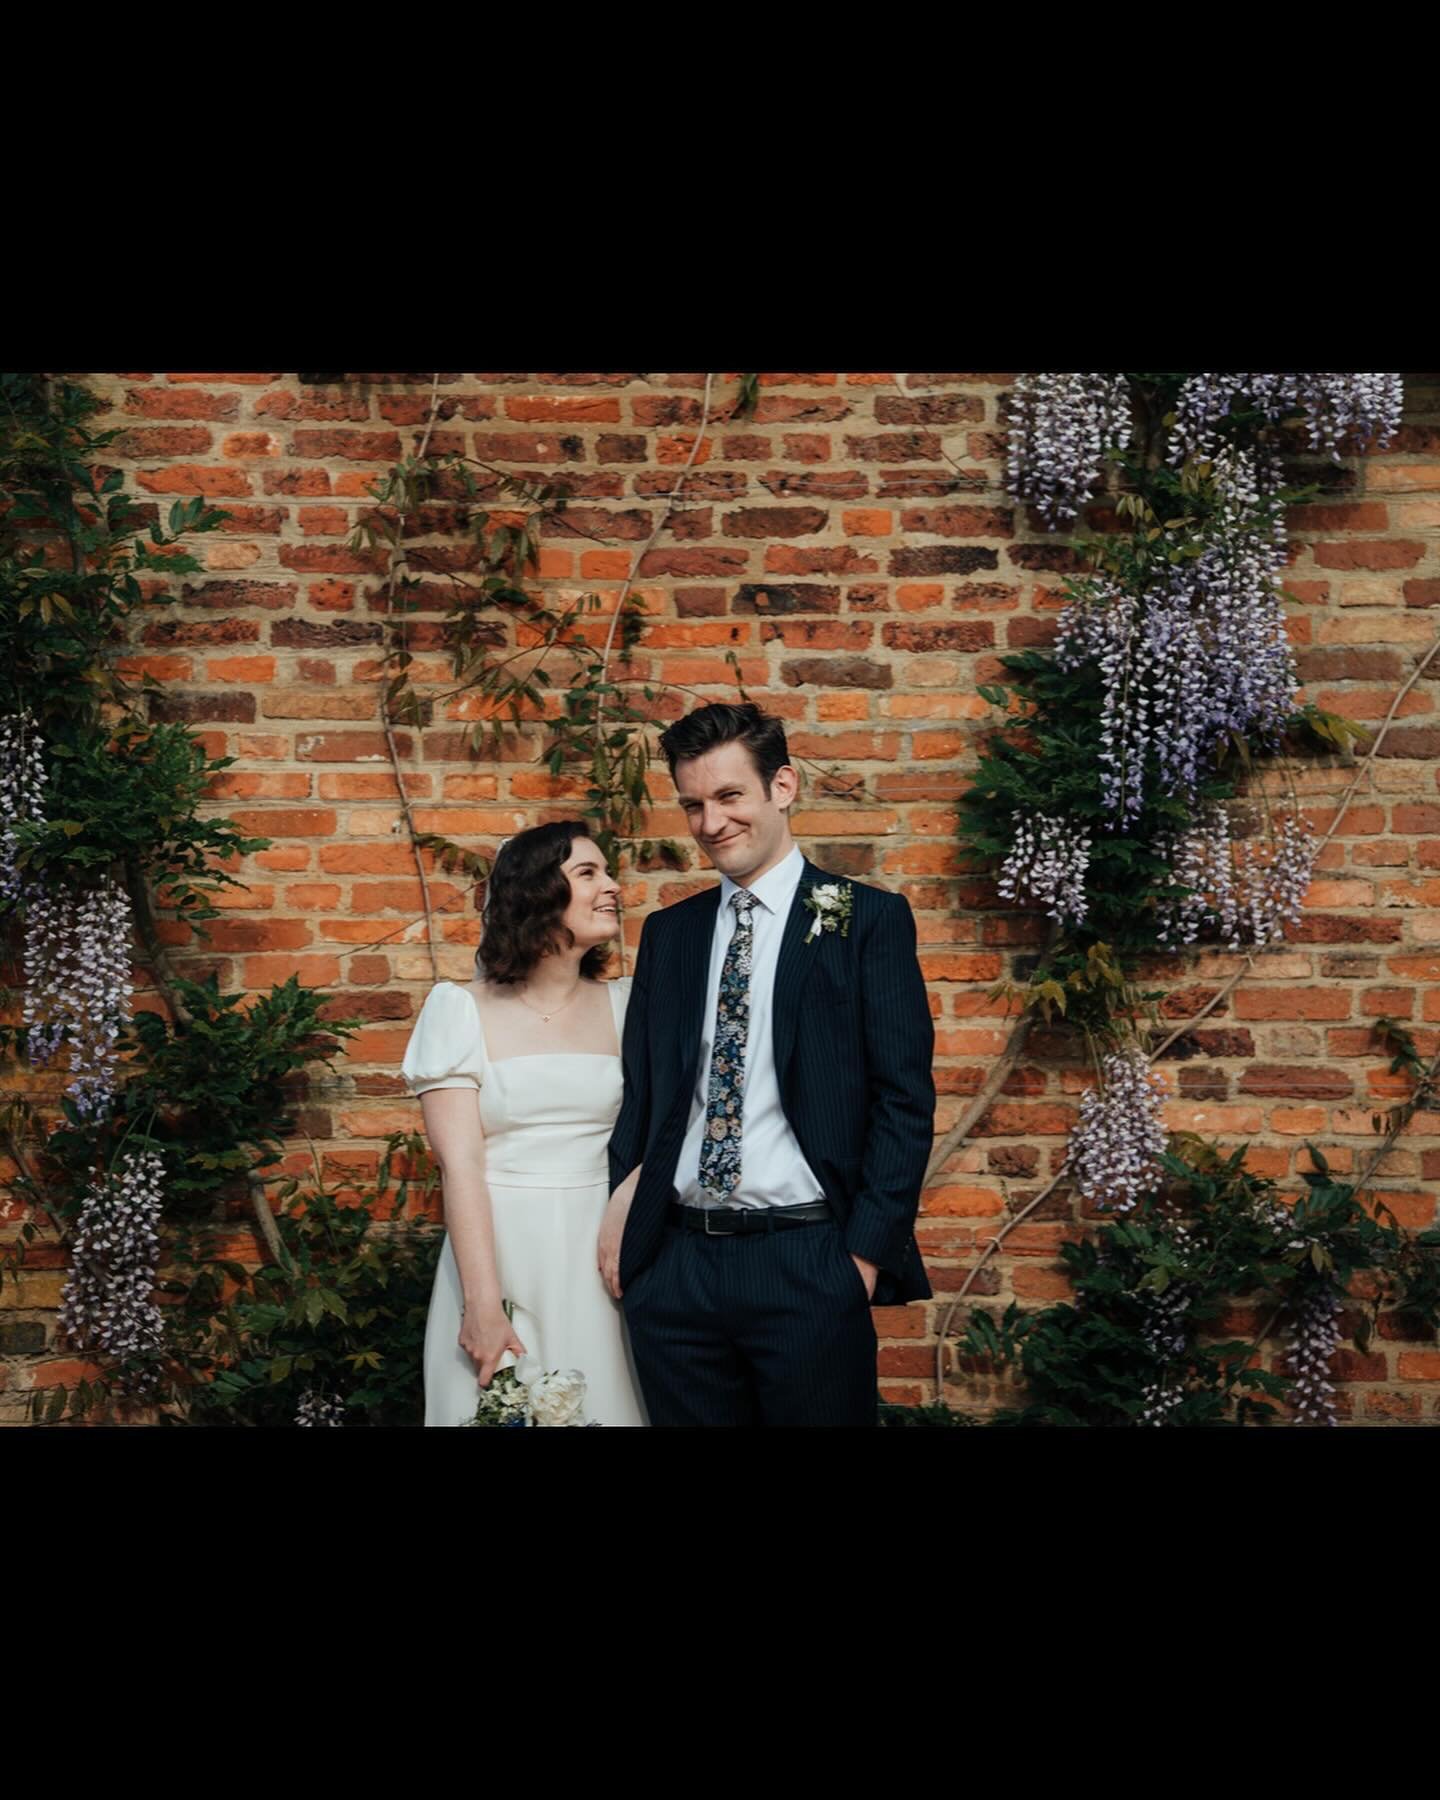 When I did my site visit at Hatfield House a month ago, the wisteria had just started to bloom and I was keeping all my fingers crossed that it would still be out on Alice and Etienne&rsquo;s wedding day. We were super lucky, not just with the flower